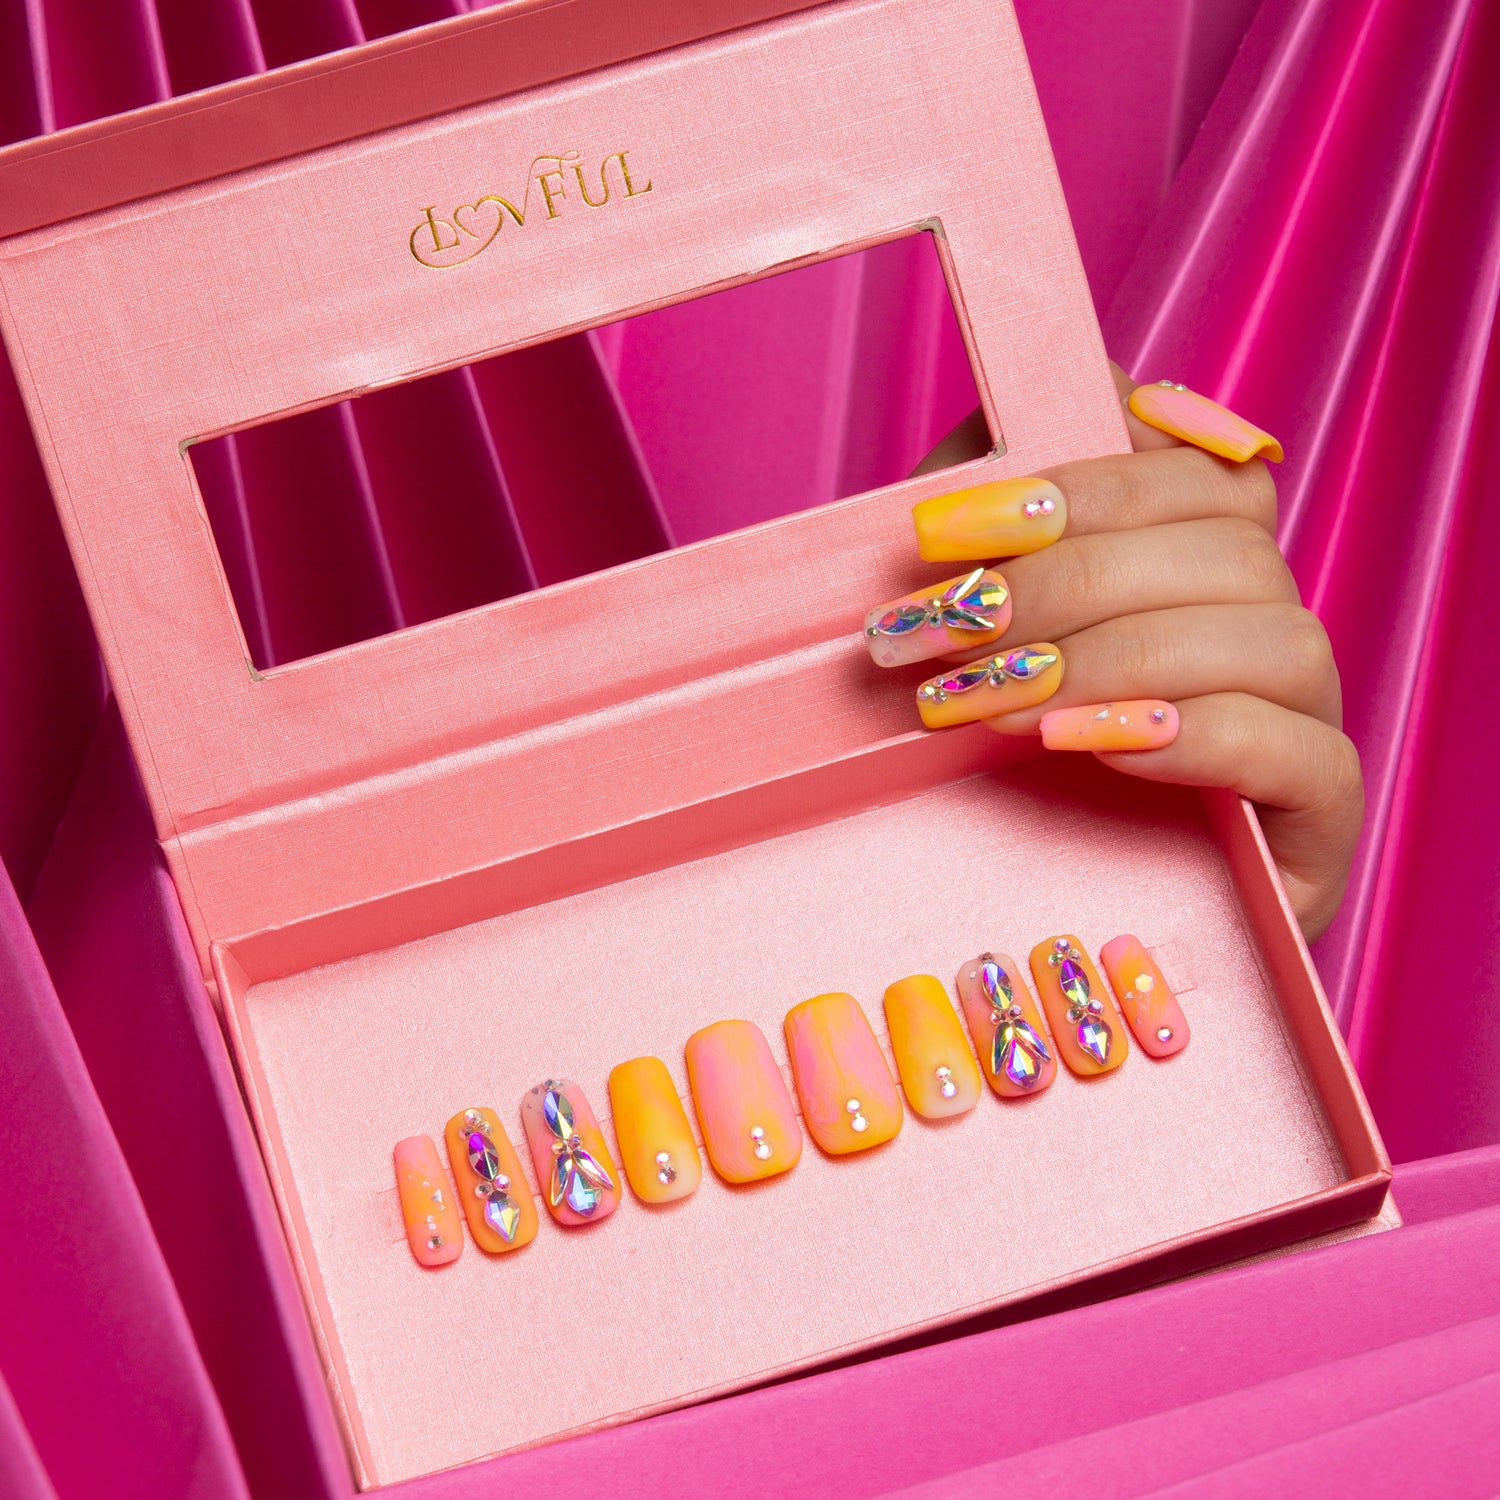 Lovful 'Sunset Slushy' press-on nails in orange and yellow tones with rhinestone accents, displayed in an open pink box with a window. Hand with matching nails also visible.